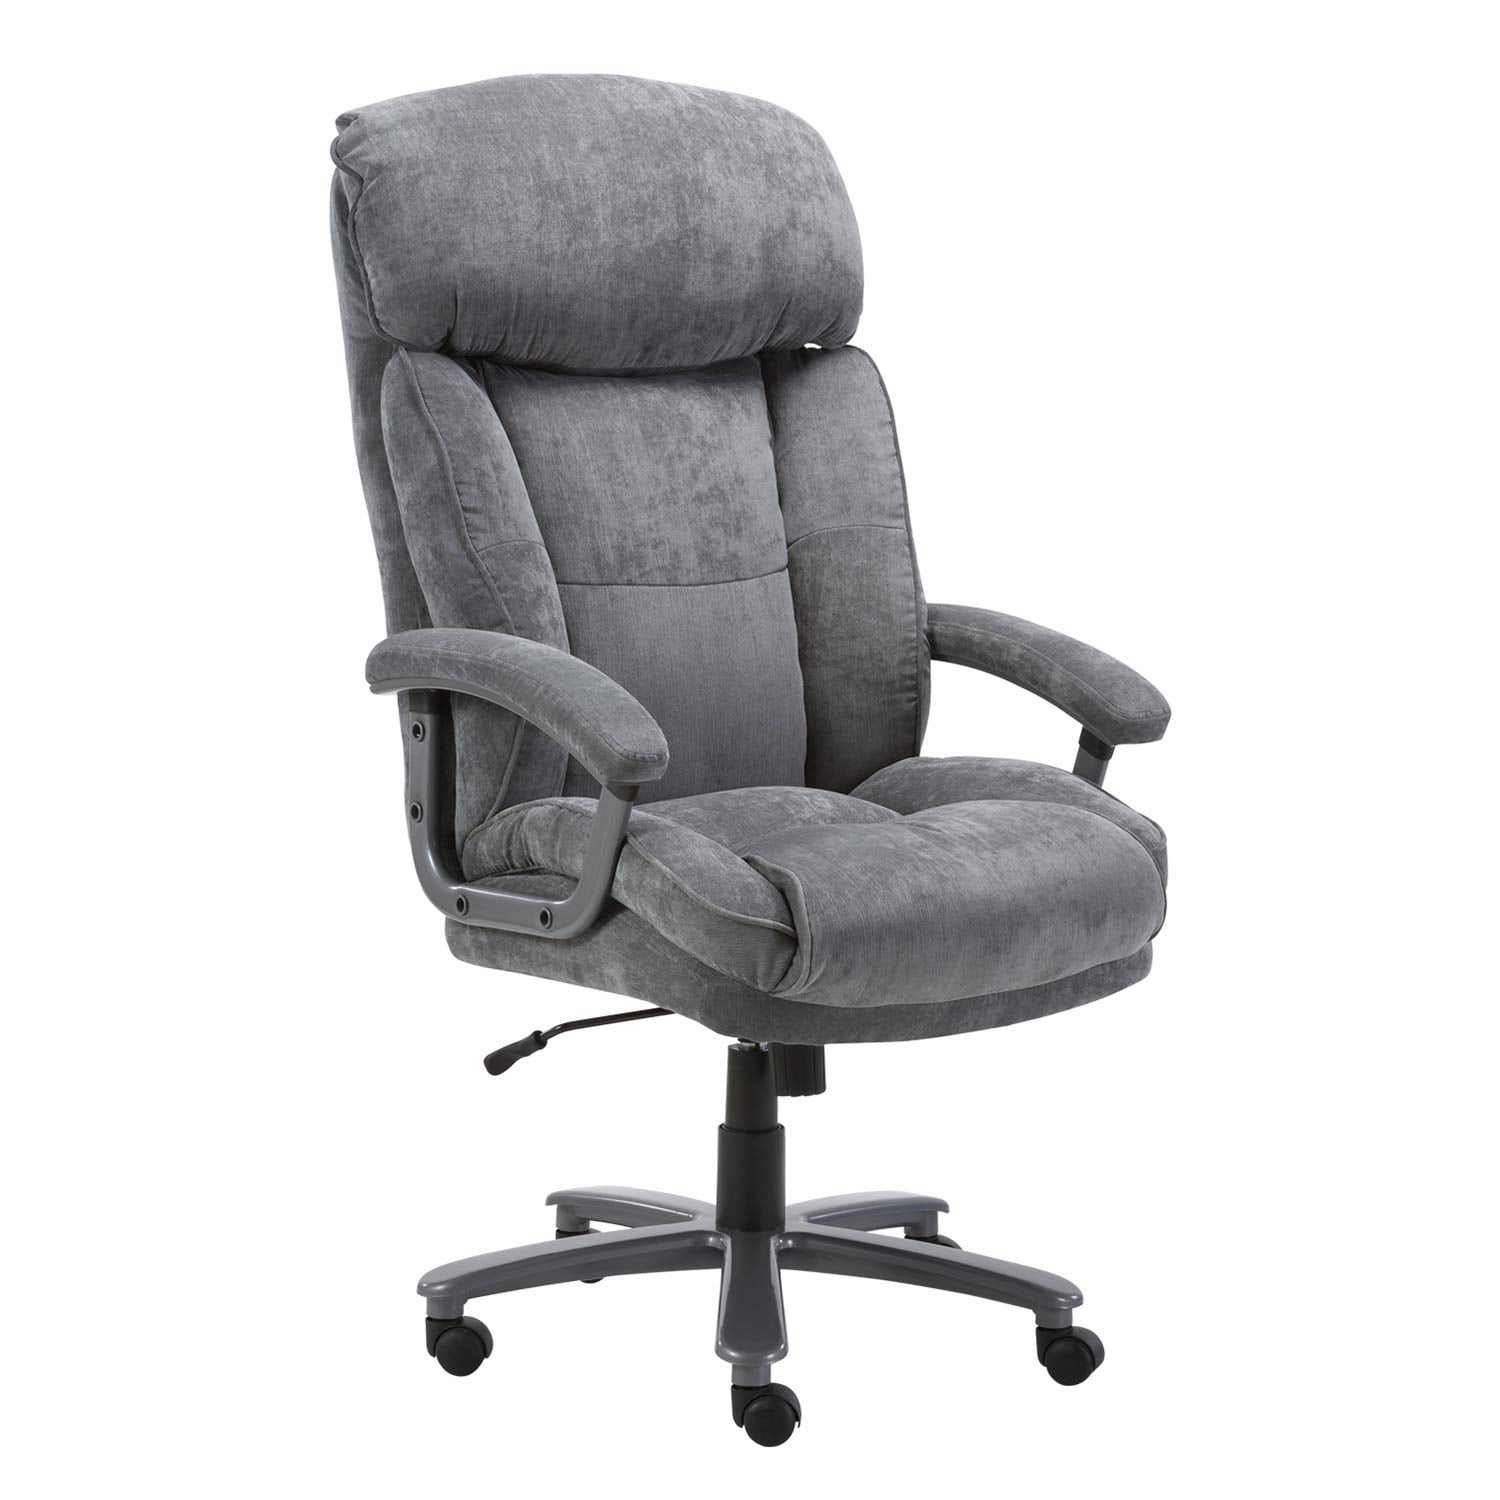 CLATINA Ergonomic Big & Tall Executive Office Chair with Upholstered